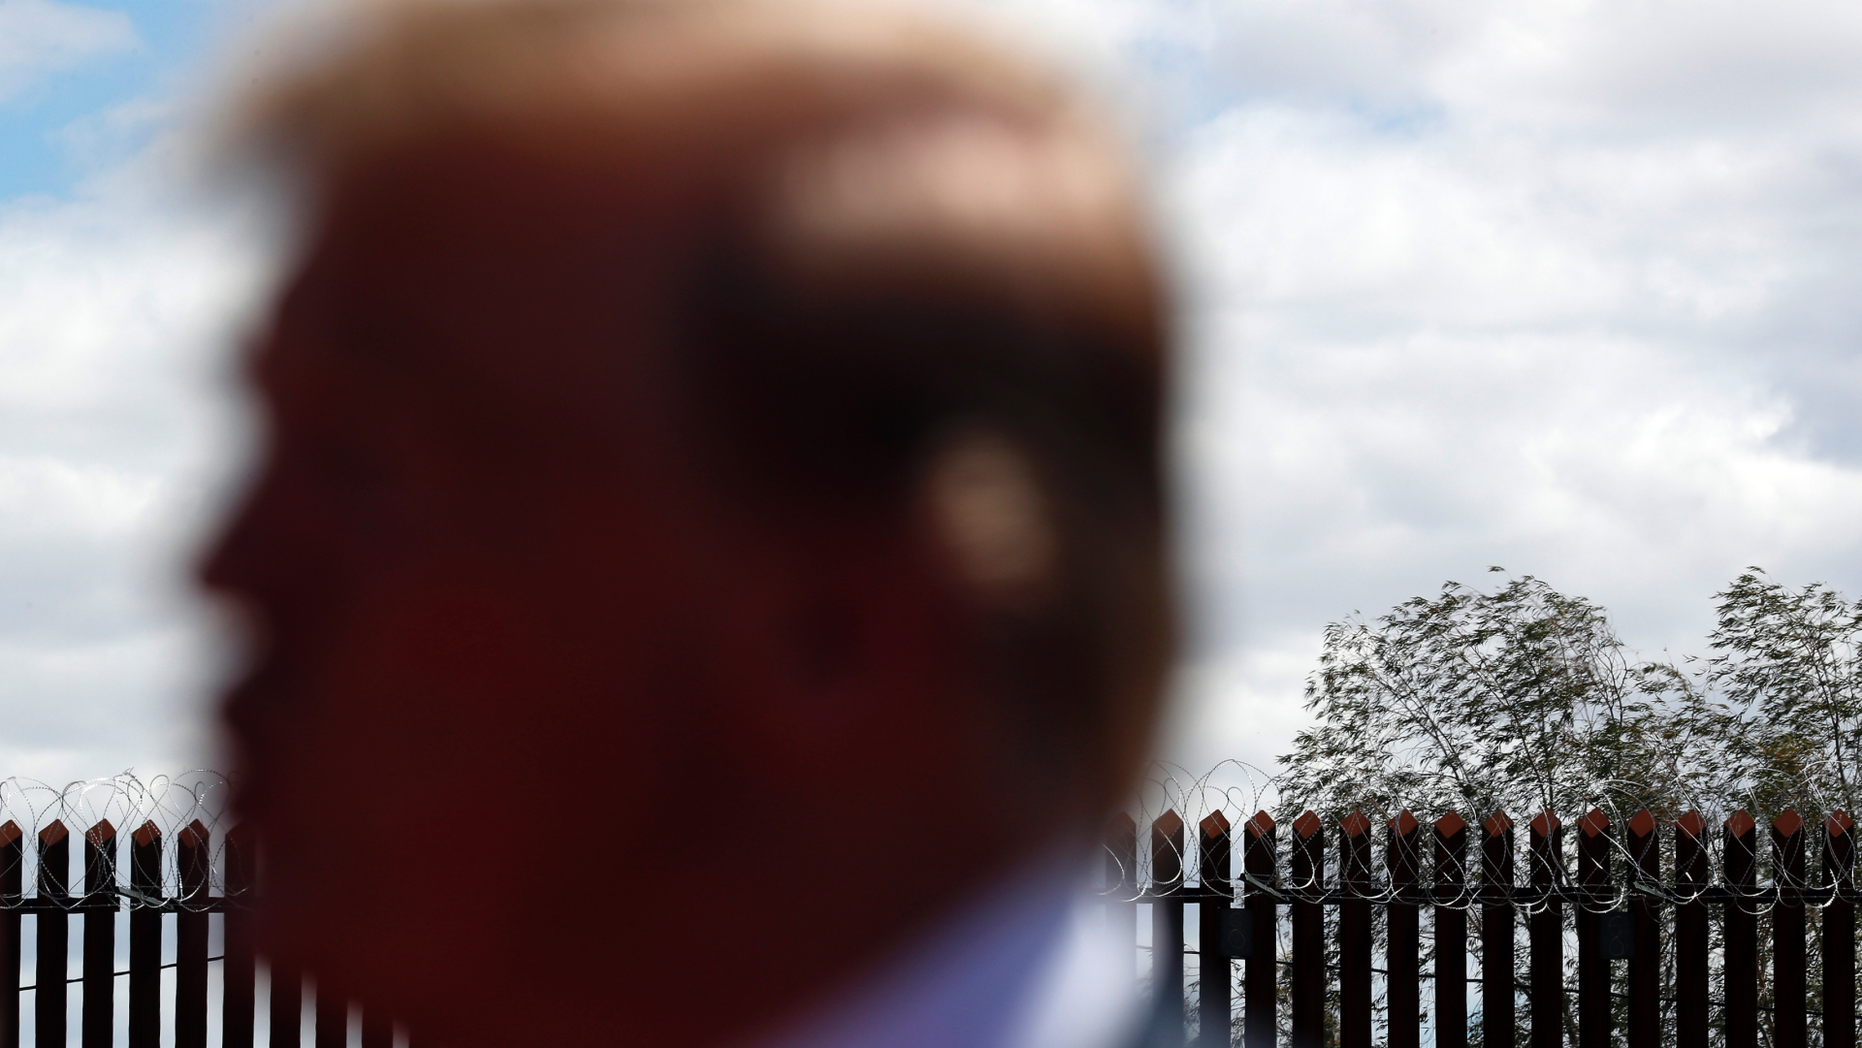 Archive - On this Friday, April 5, 2019, photo archive, President Donald Trump talks as he visits a new section of the wall of the Mexican border in Calexico, California. A federal judge in California has blocked Trump from building sections of his long-sought border wall with money guaranteed under his declaration of a national emergency. US District Judge Haywood Gilliam Jr. on Friday, May 24, 2019, immediately stopped the government's efforts to redirect funds designated by the military to build sections of the Mexican border wall. (Photo AP / Jacquelyn Martin, Archive)